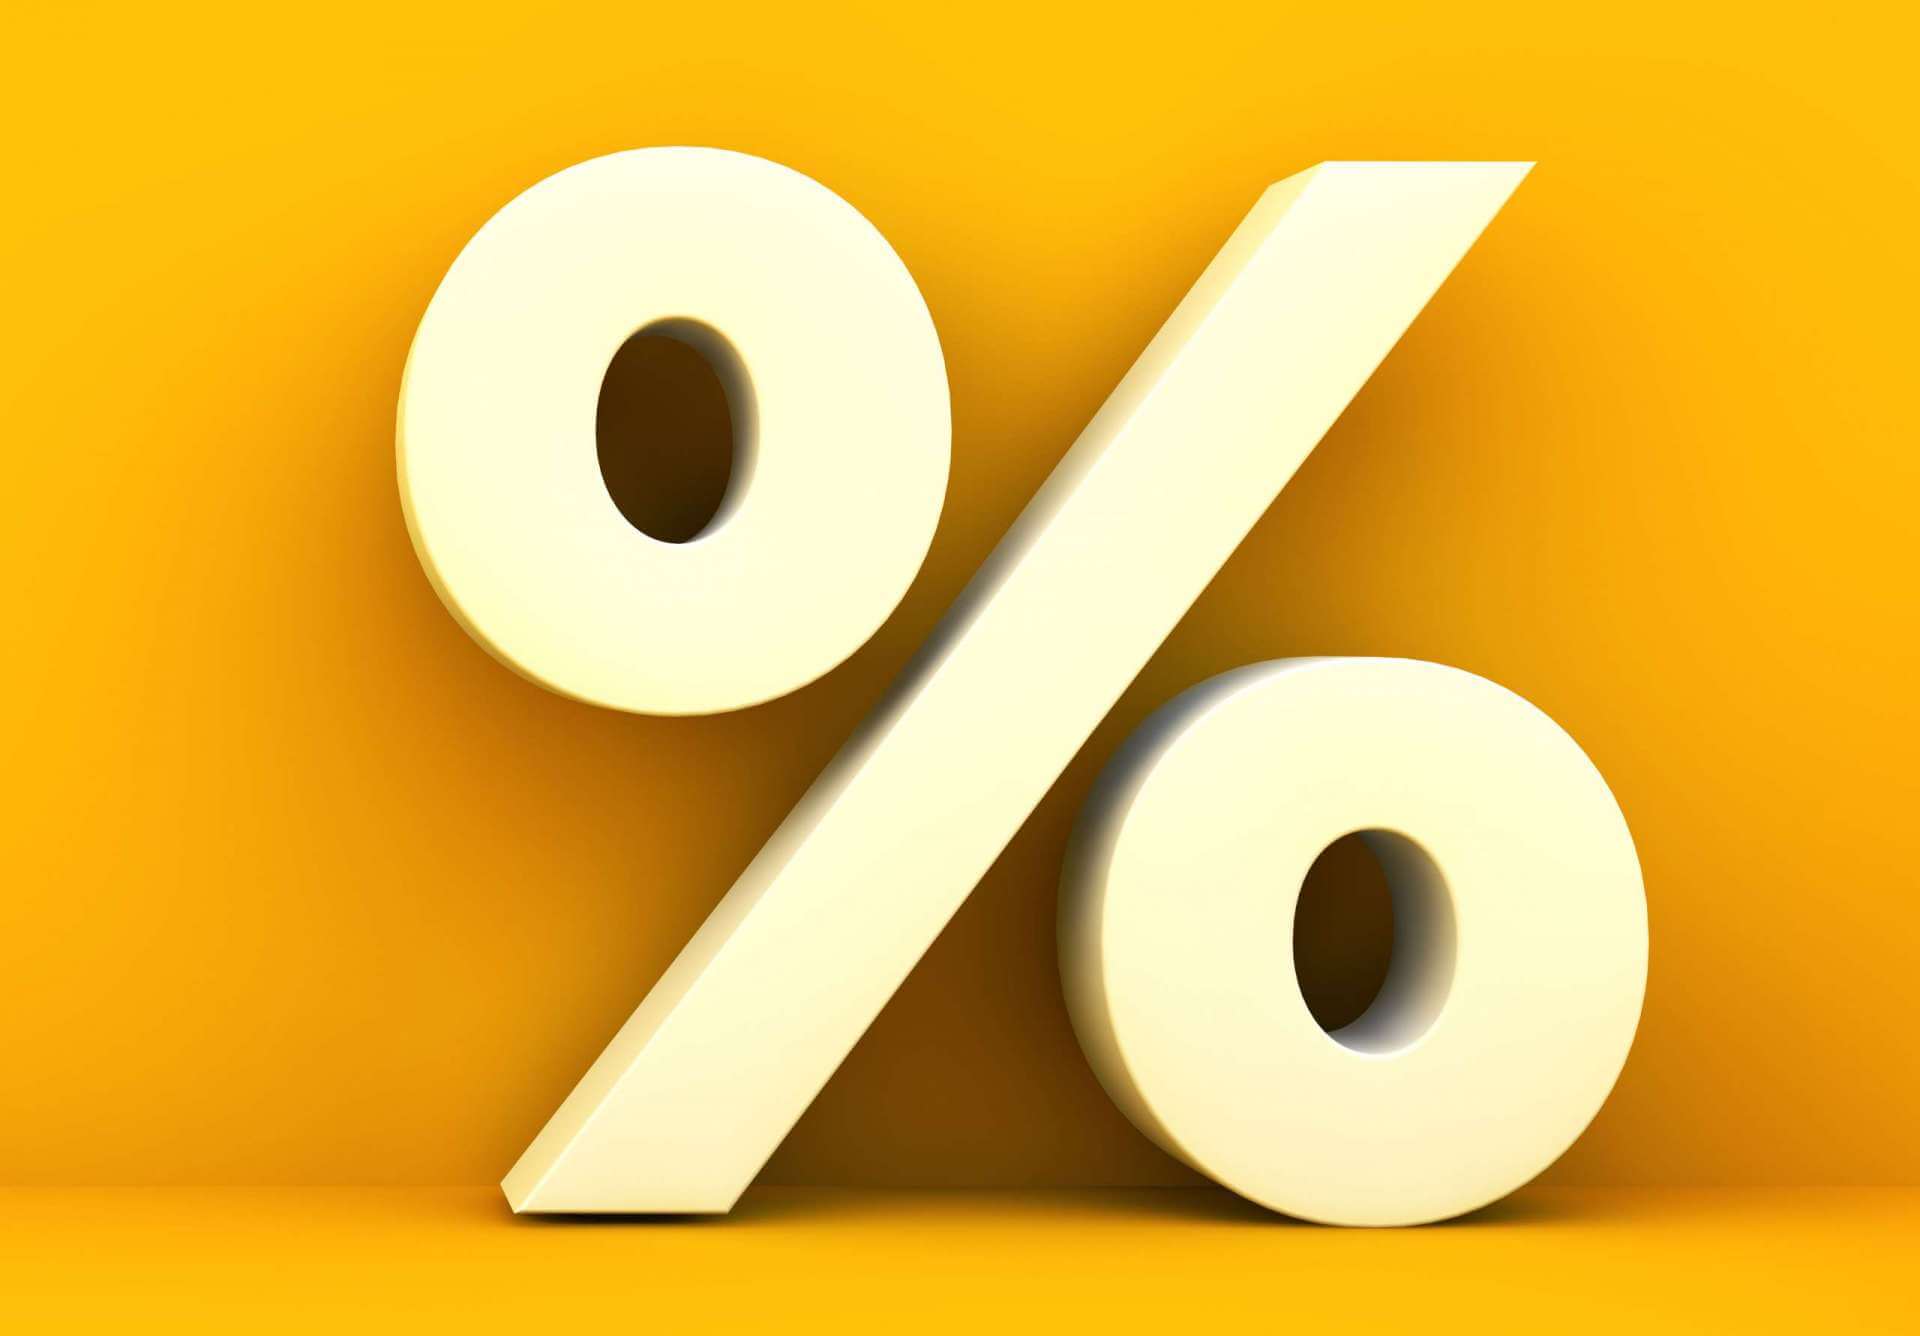 The Shocking Truth: You Won’t Believe What 2% Of 10 Equals!